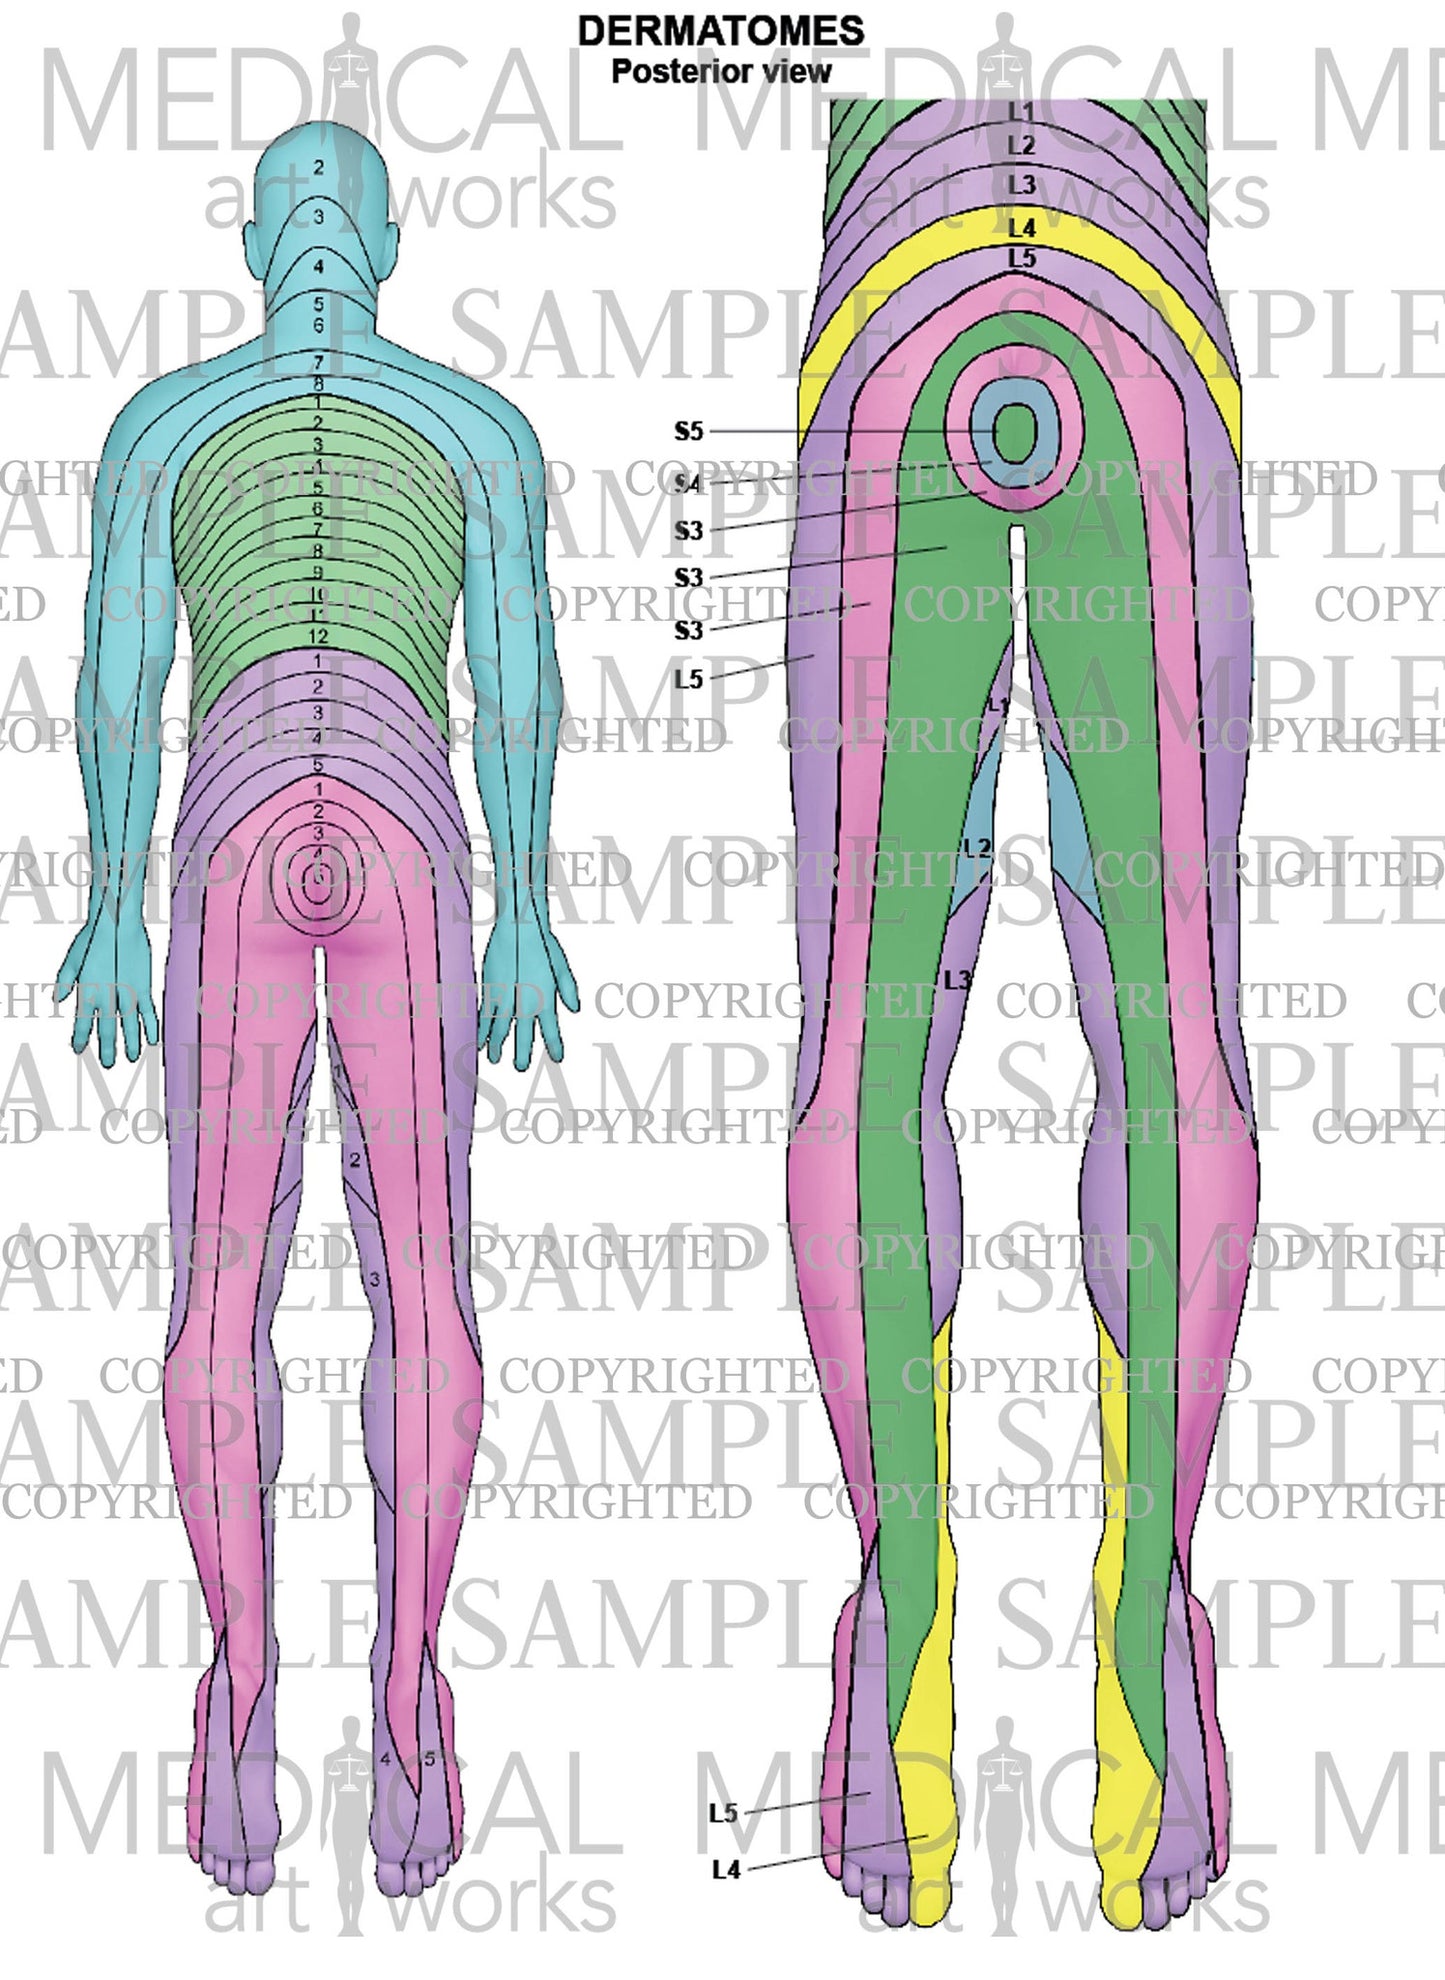 Dermatome - Spinal nerve root skin supply - Posterior view